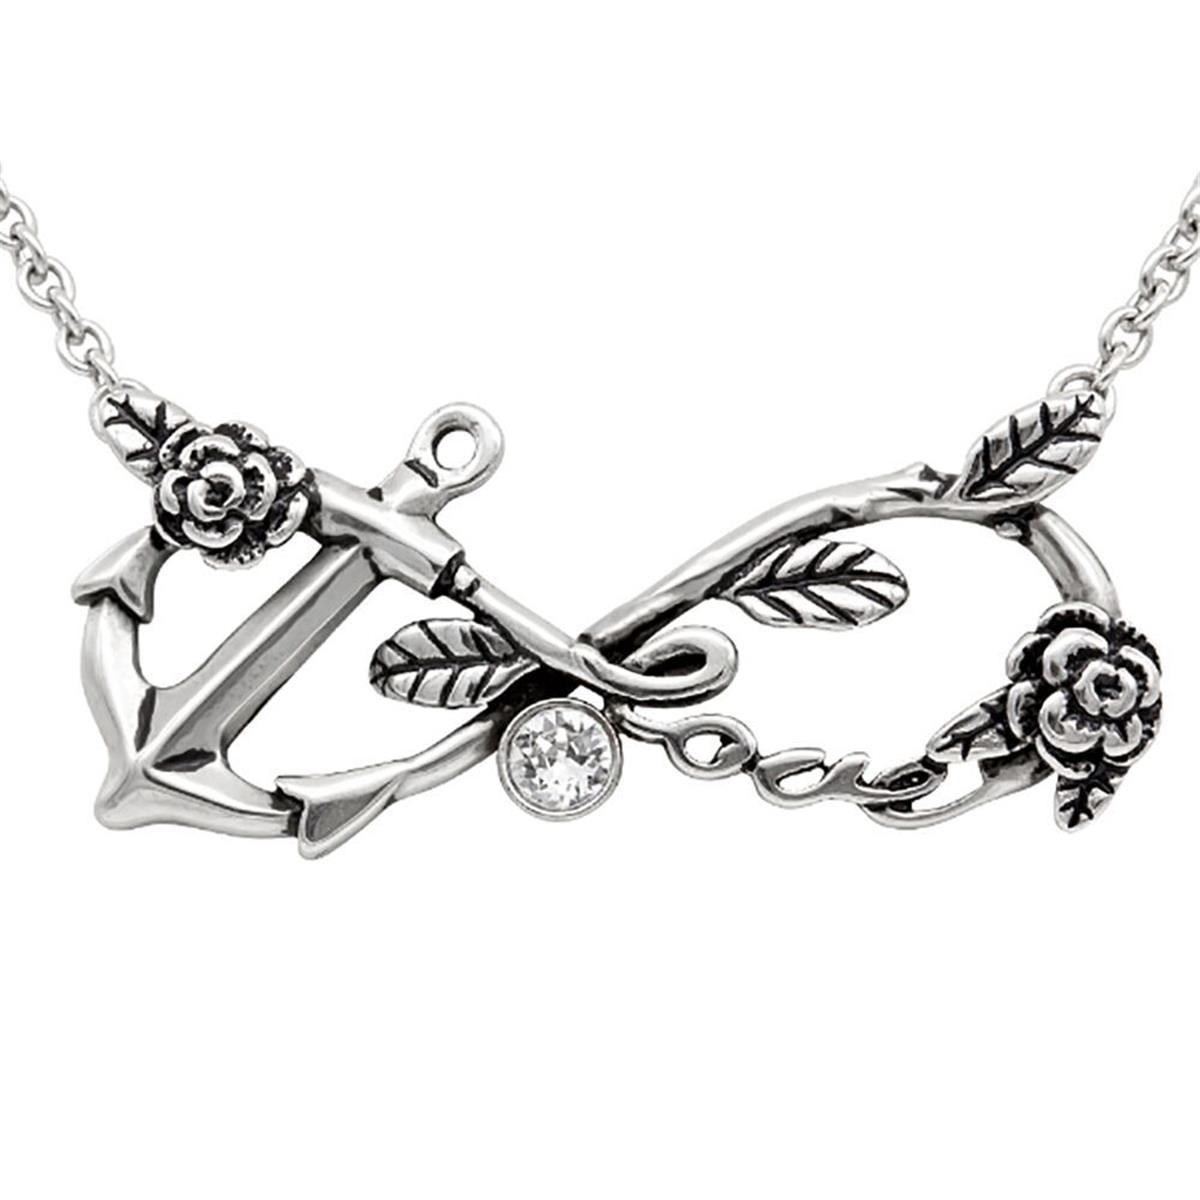 Cn167 Infinity Love Anchor Necklace